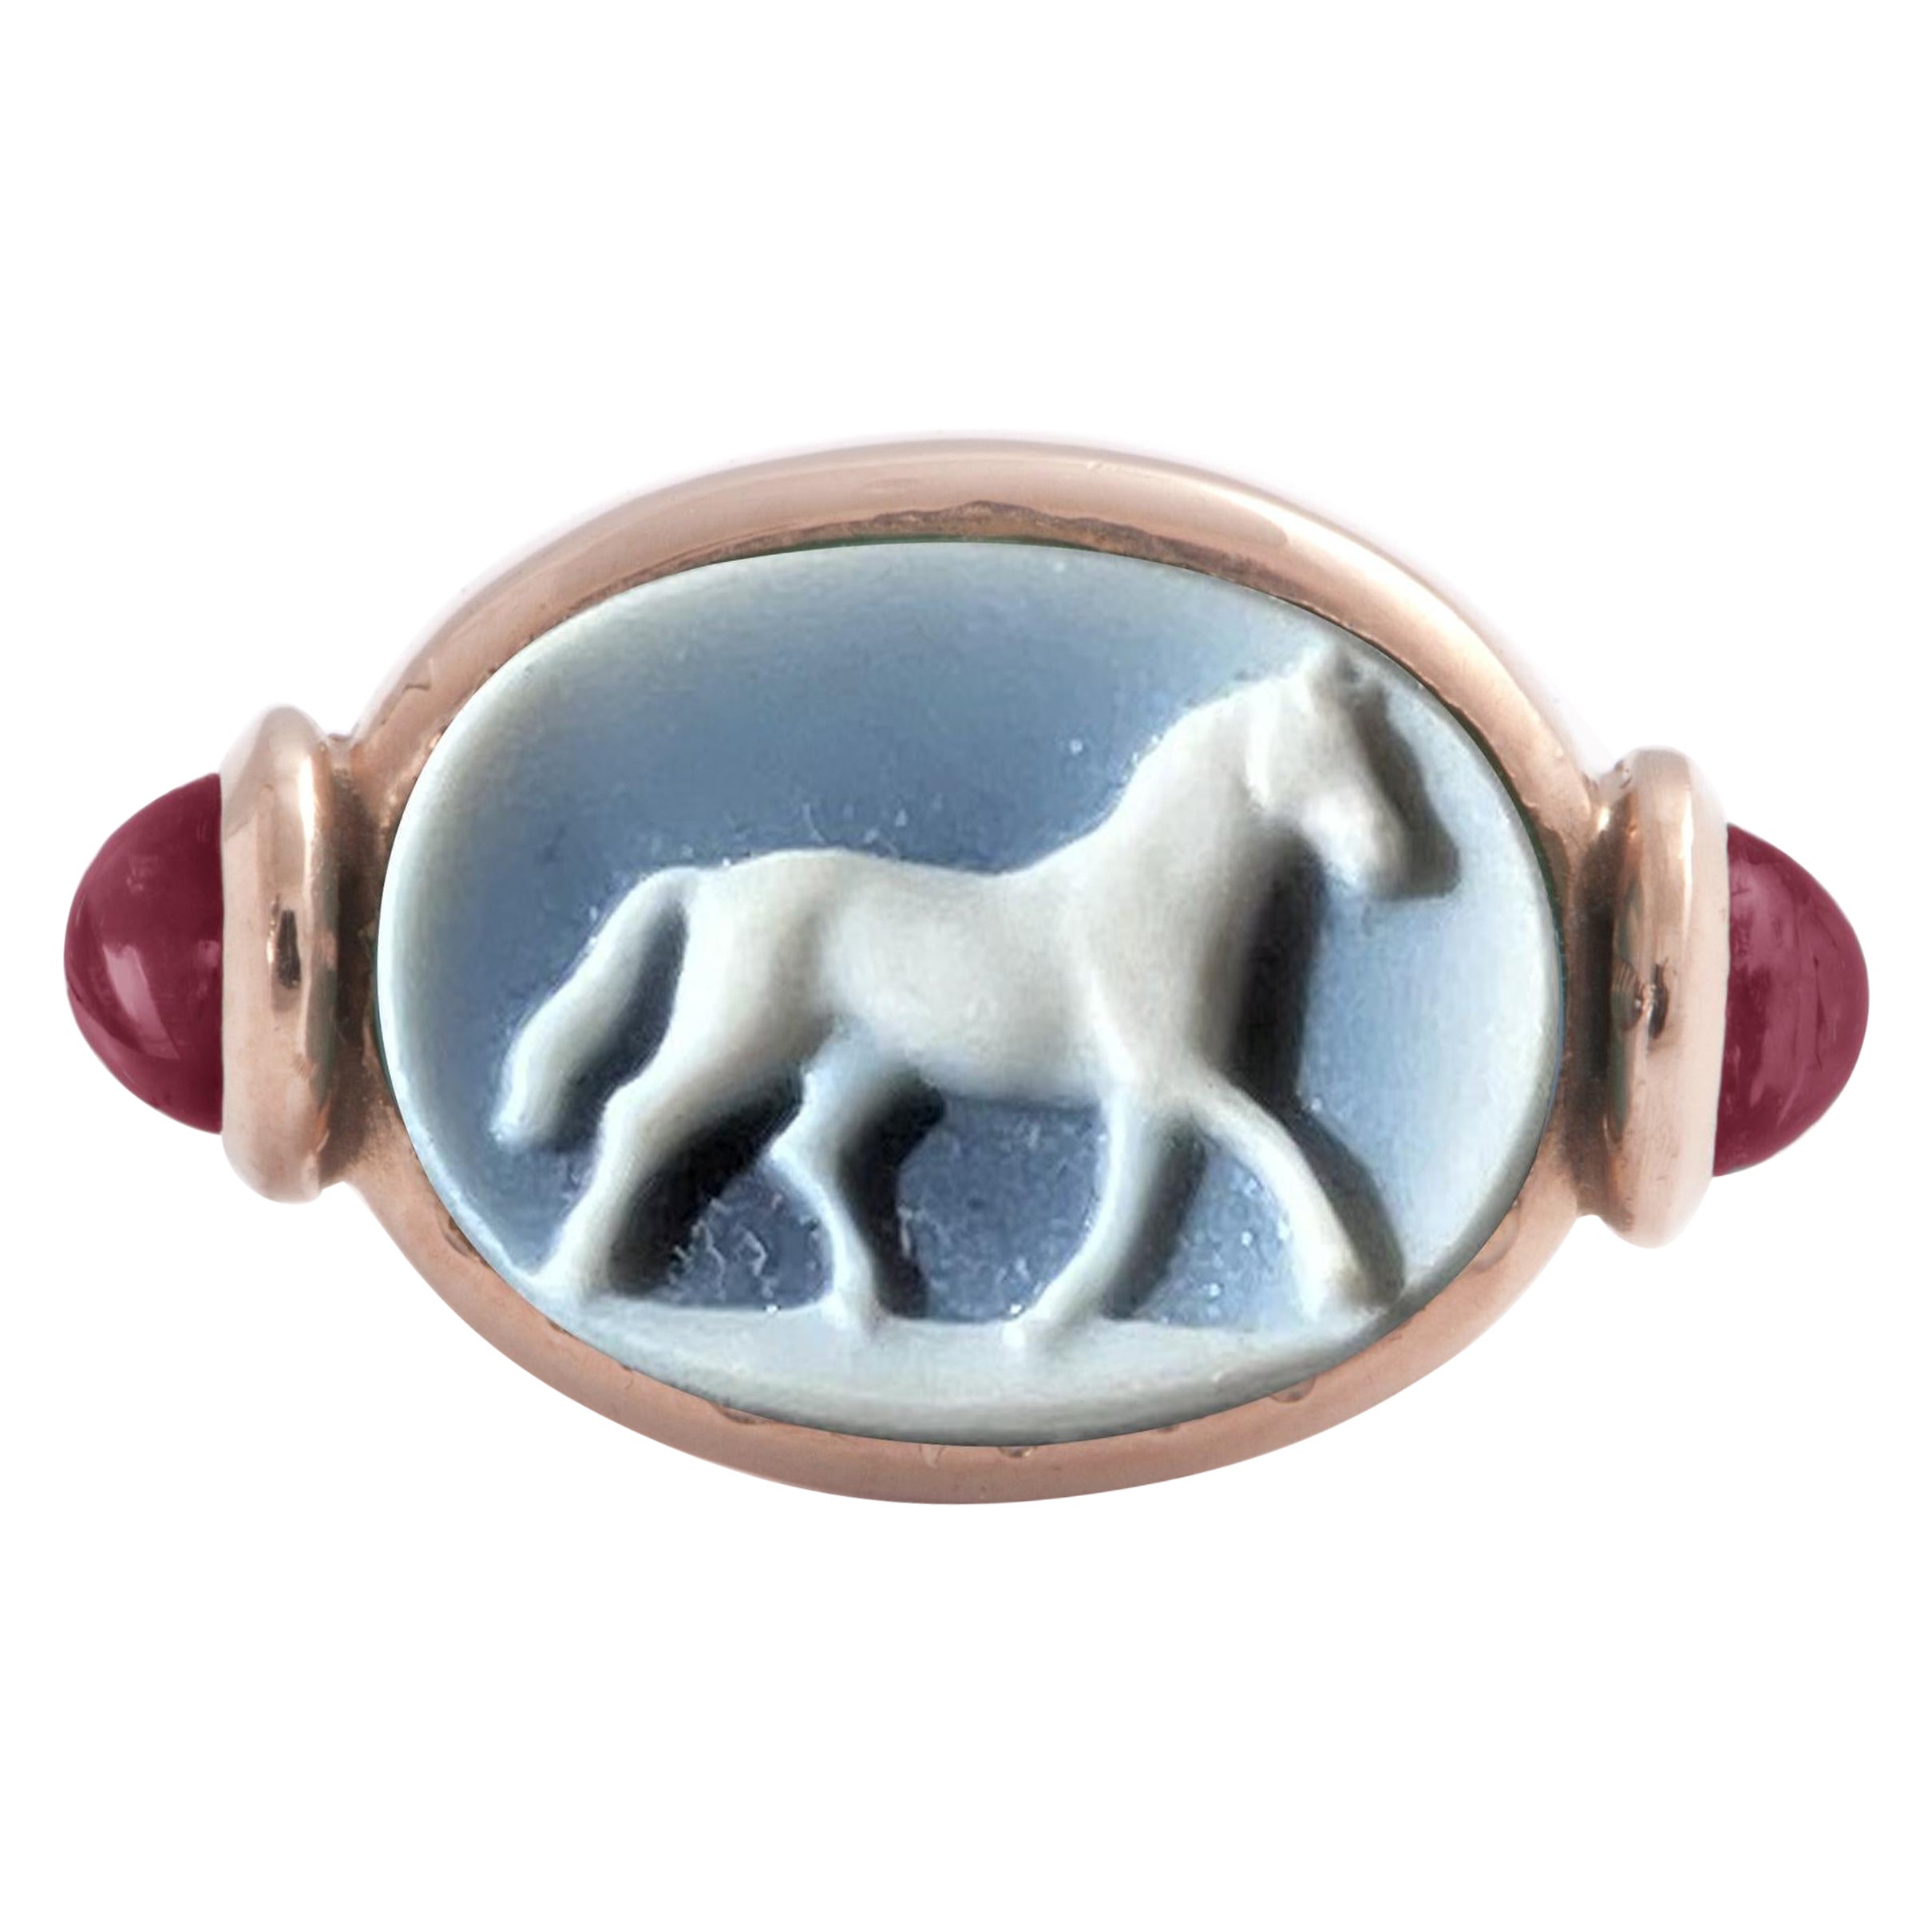 Unisex Black and White Carved Horse 18 Karat Gold Rubellite Onyx Signet Ring For Sale